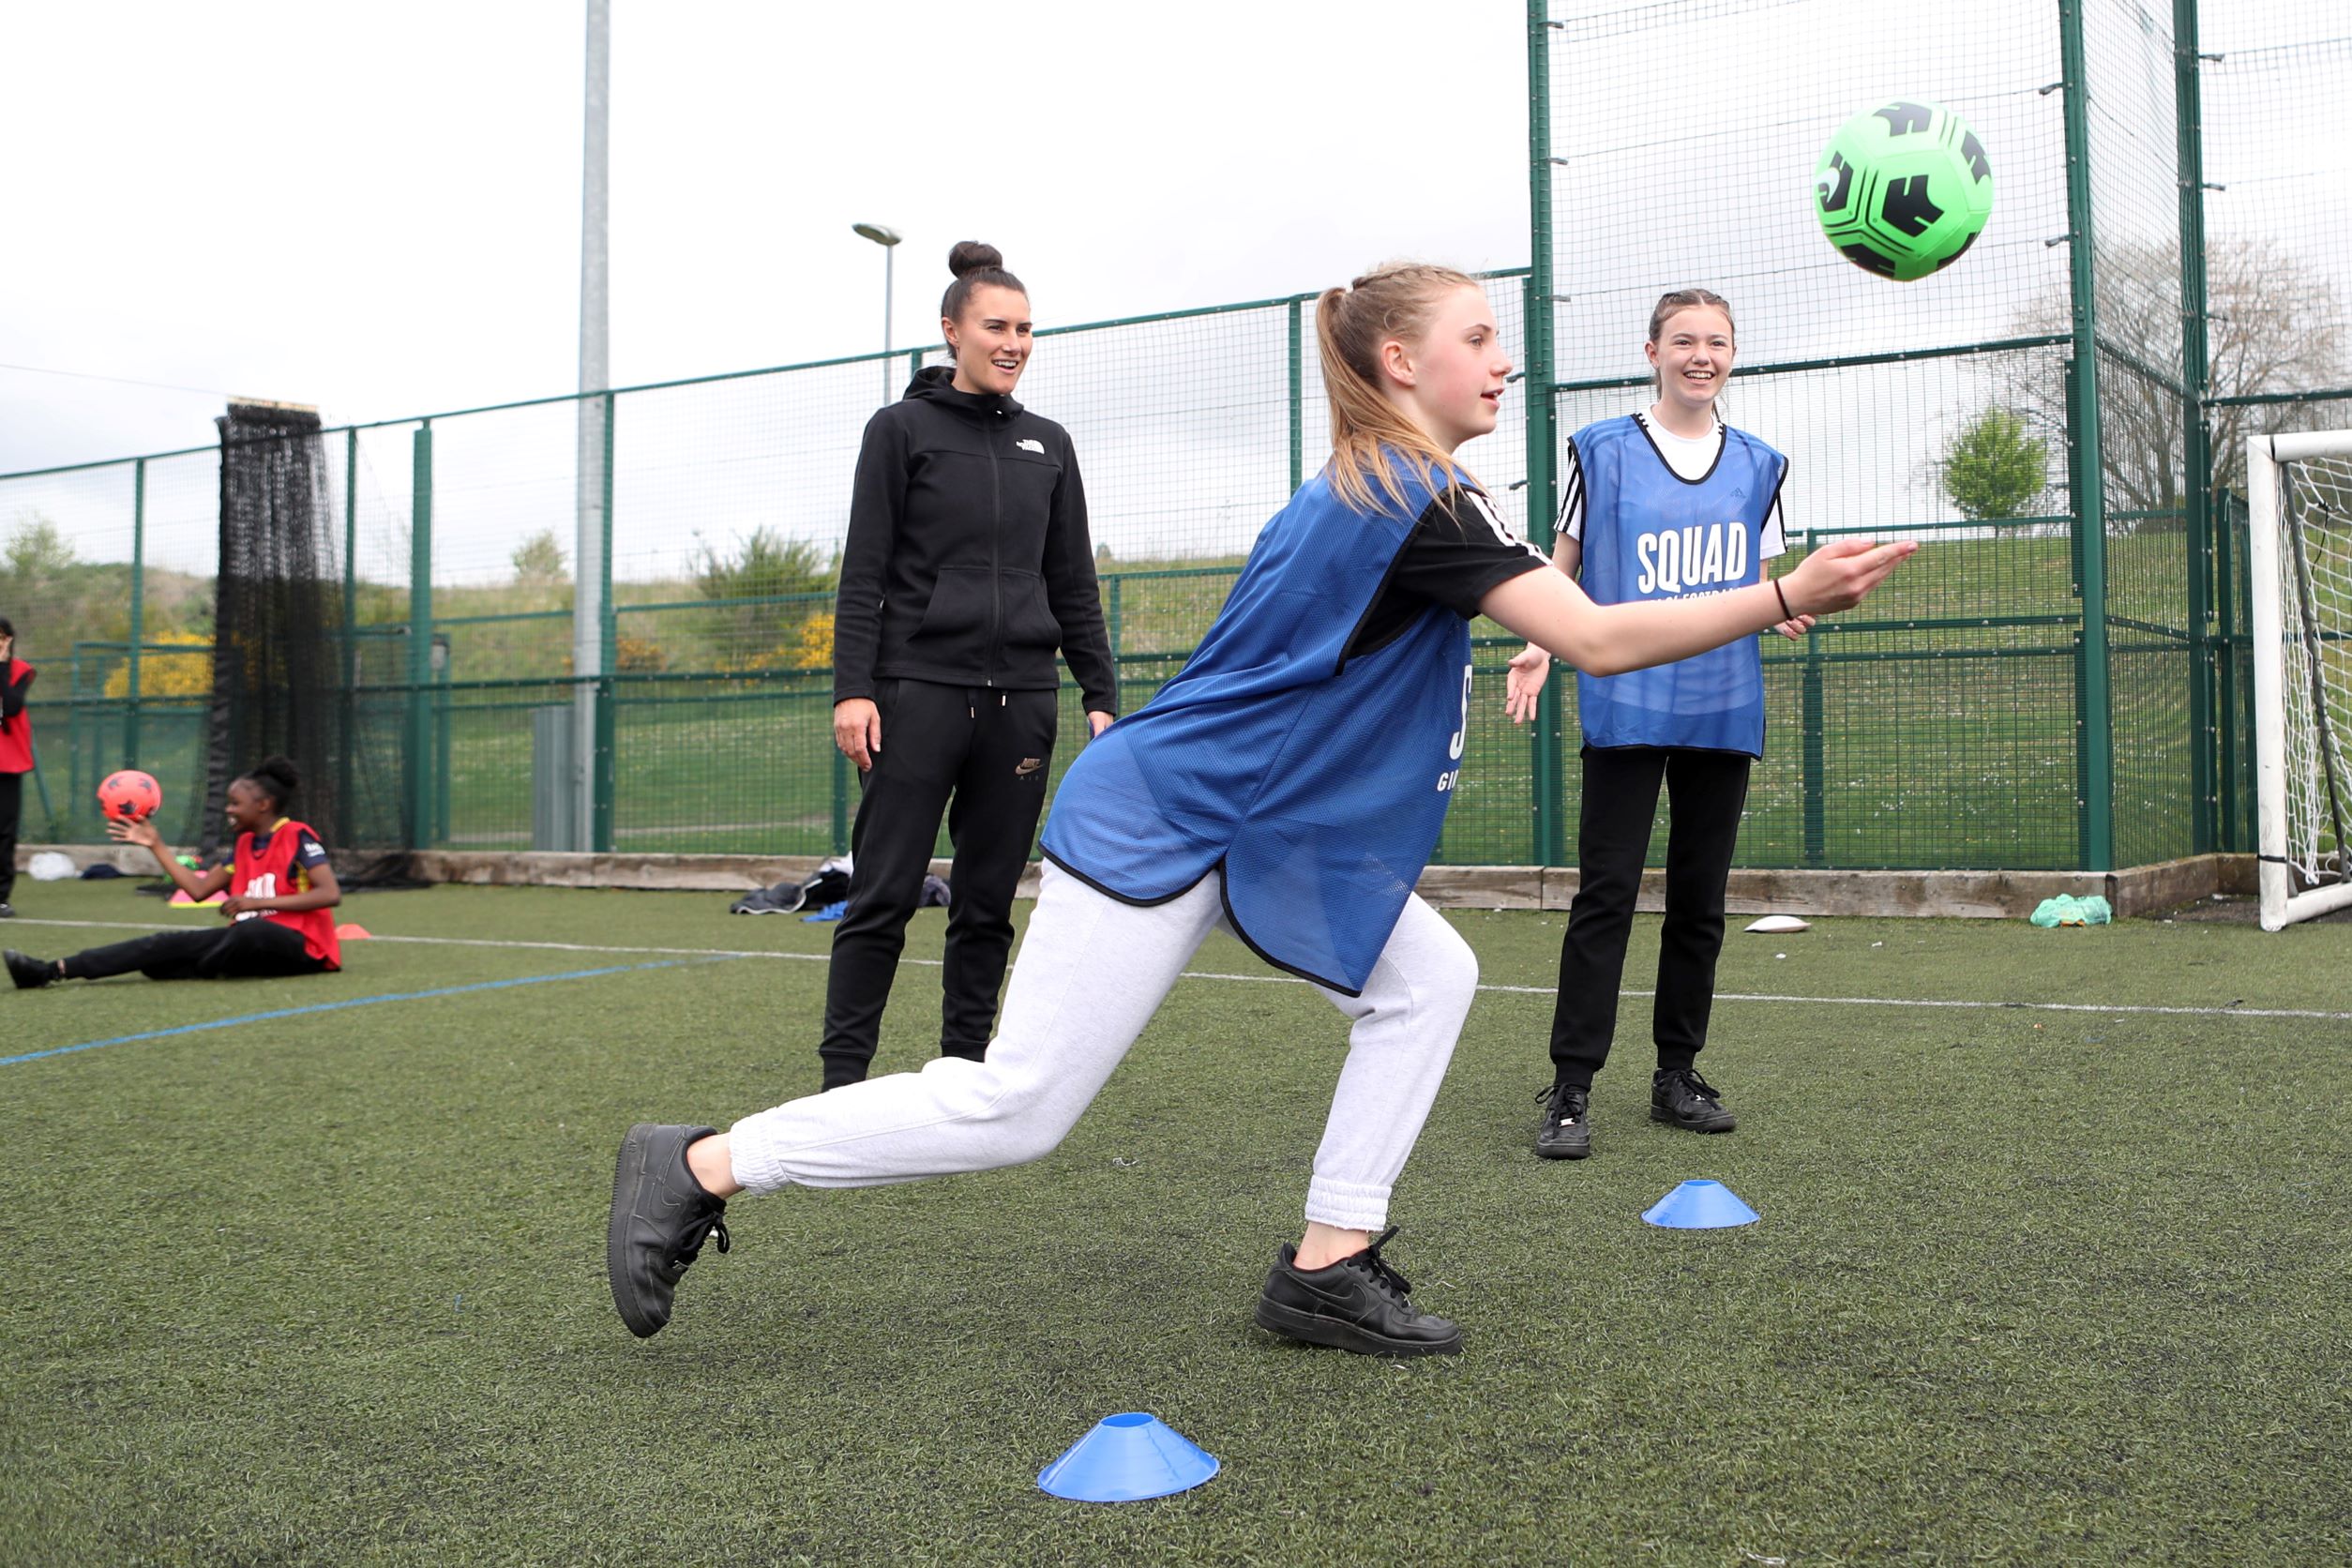 The new FA project aims to increase participation in football among 12 to 14-year-olds 